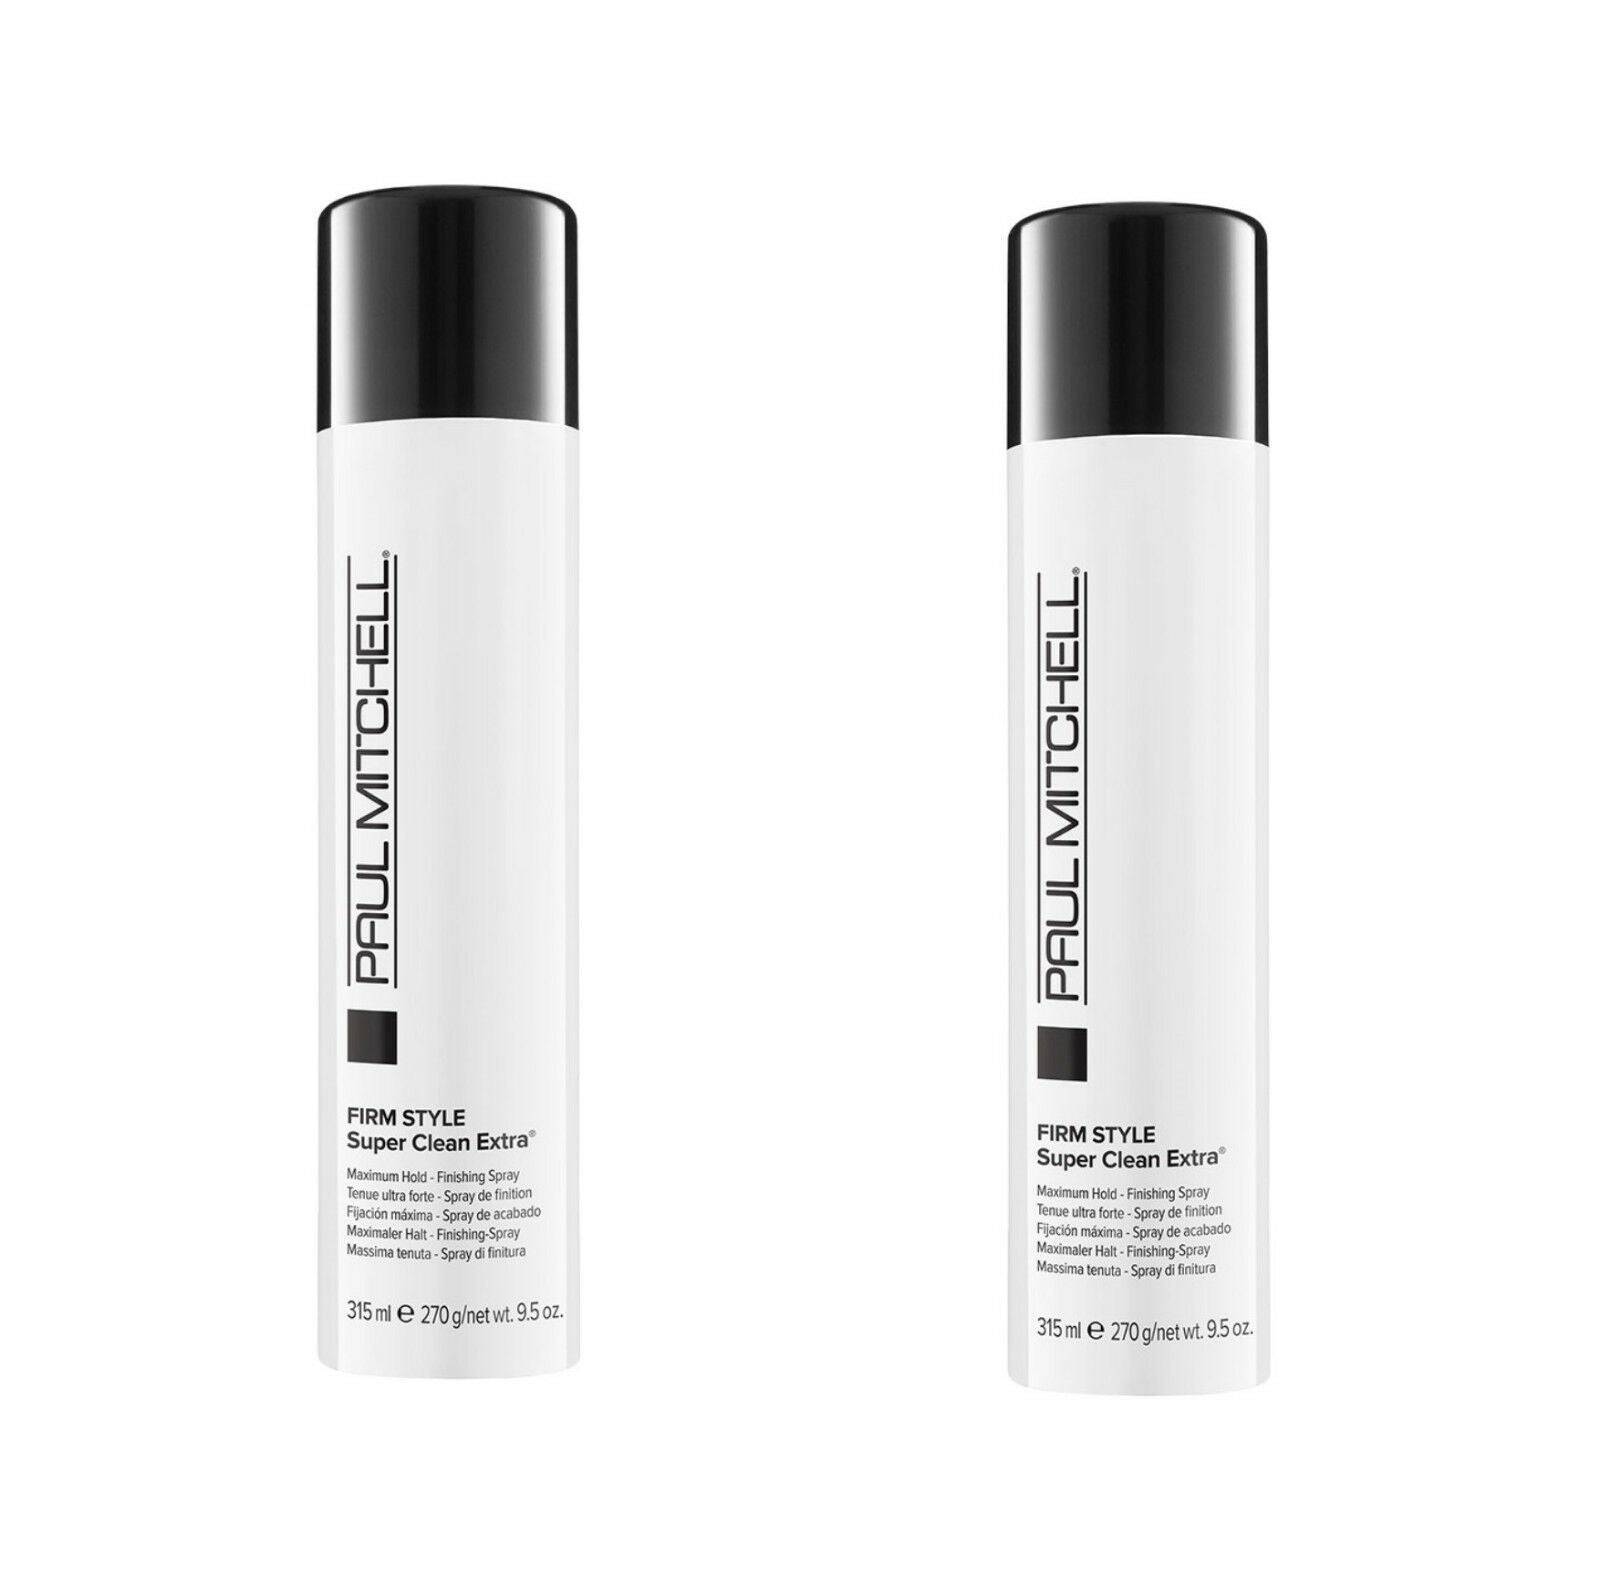 Paul Mitchell Super Clean Light Natural Hold Finishing 315ml x 2 - On Line Hair Depot